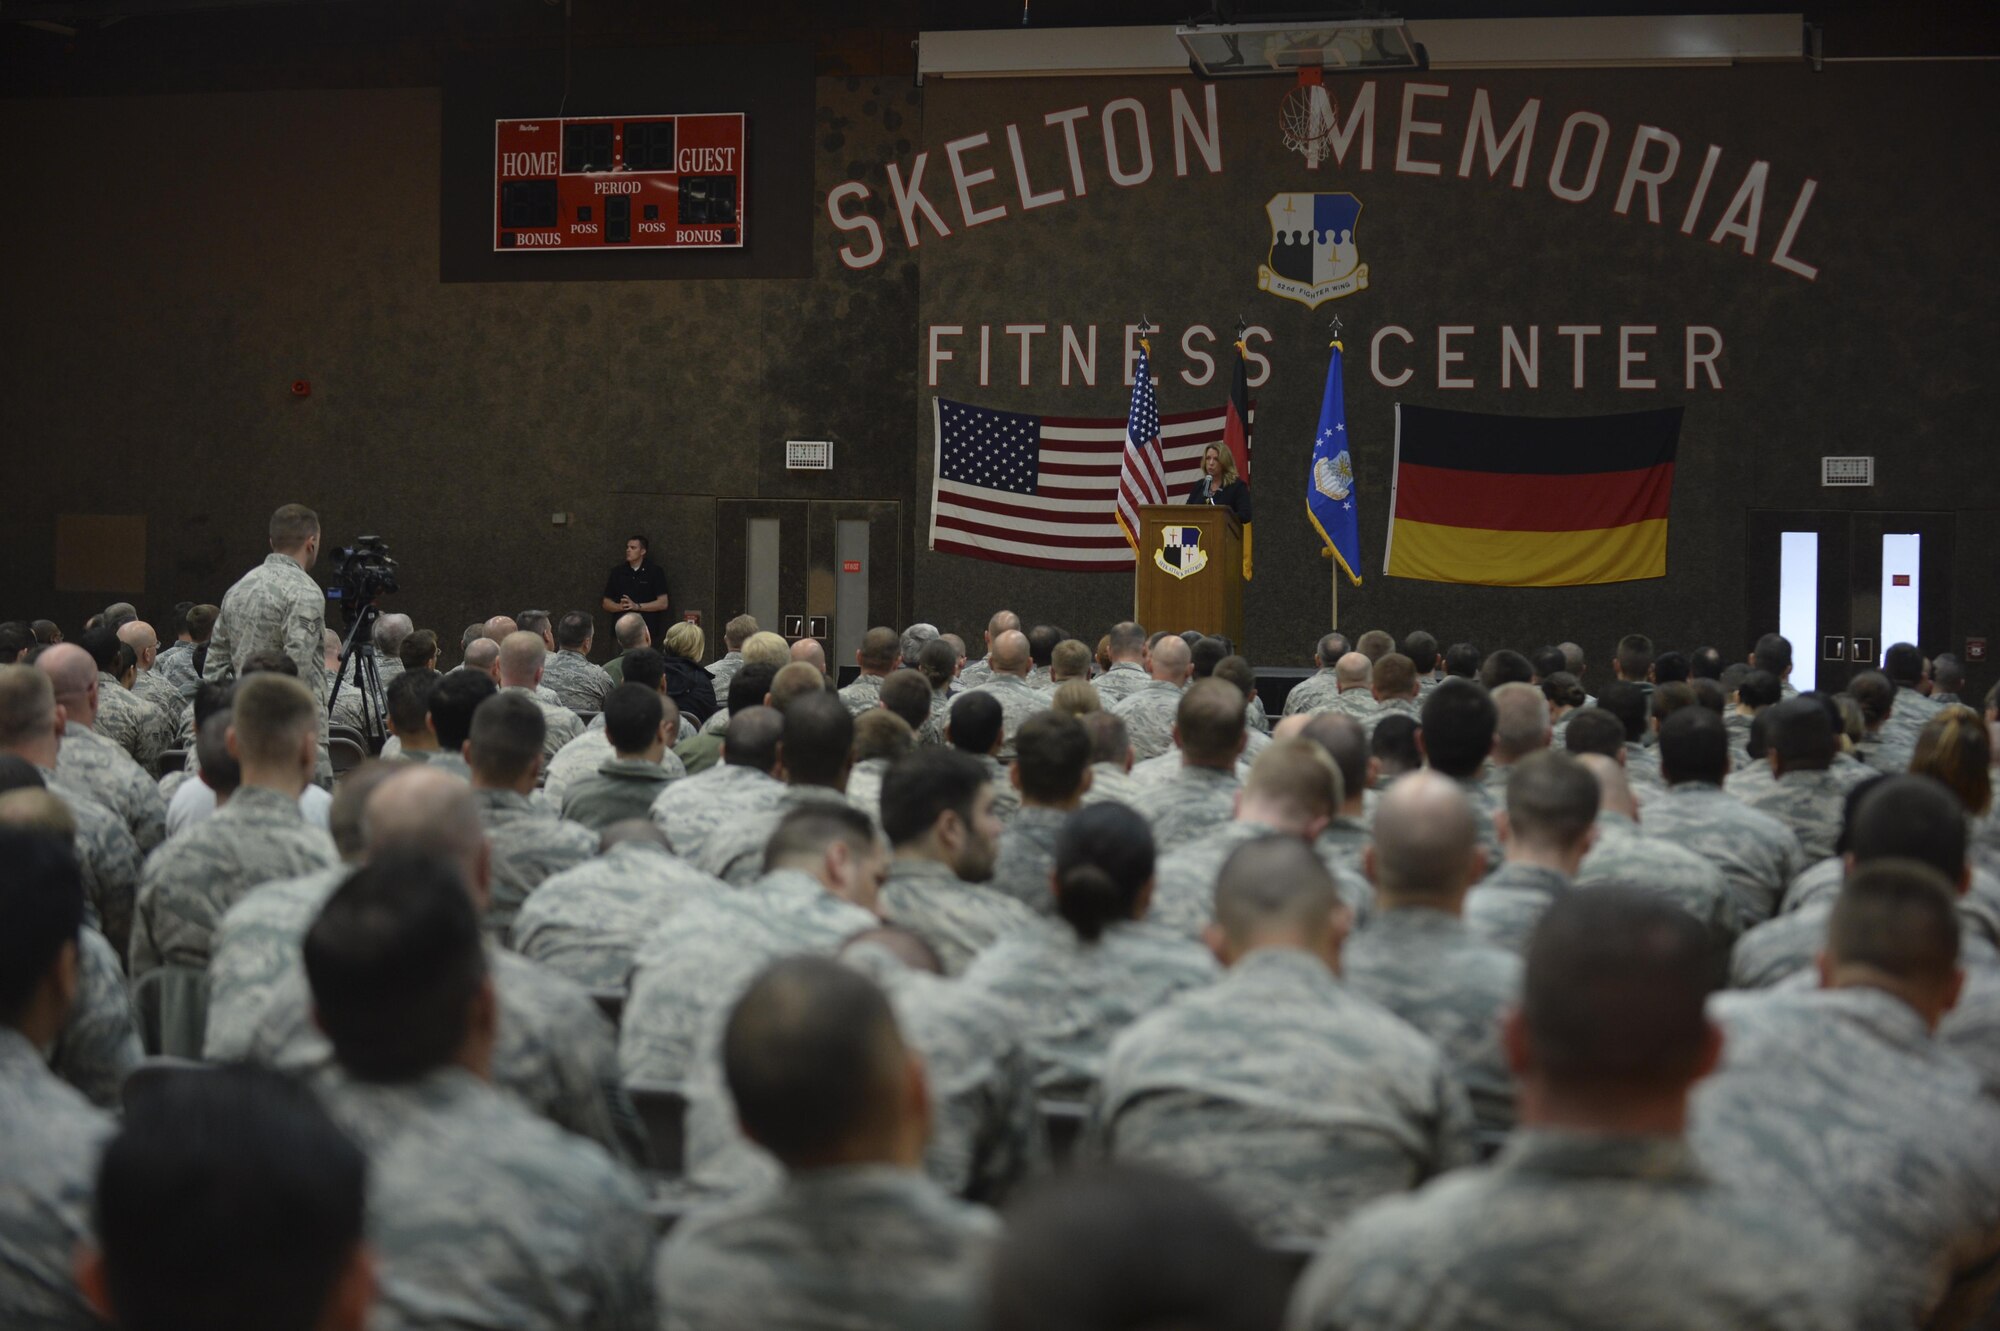 Secretary of the Air Force Deborah Lee James speaks to Airmen during an all call at Spangdahlem Air Base, Germany, June 23, 2015. The secretary completed a visit of installations through Europe June 24, 2015, to meet Airmen, community leaders and allied and partner nation defense chiefs. (U.S. Air Force photo/Staff Sgt. Joe W. McFadden)